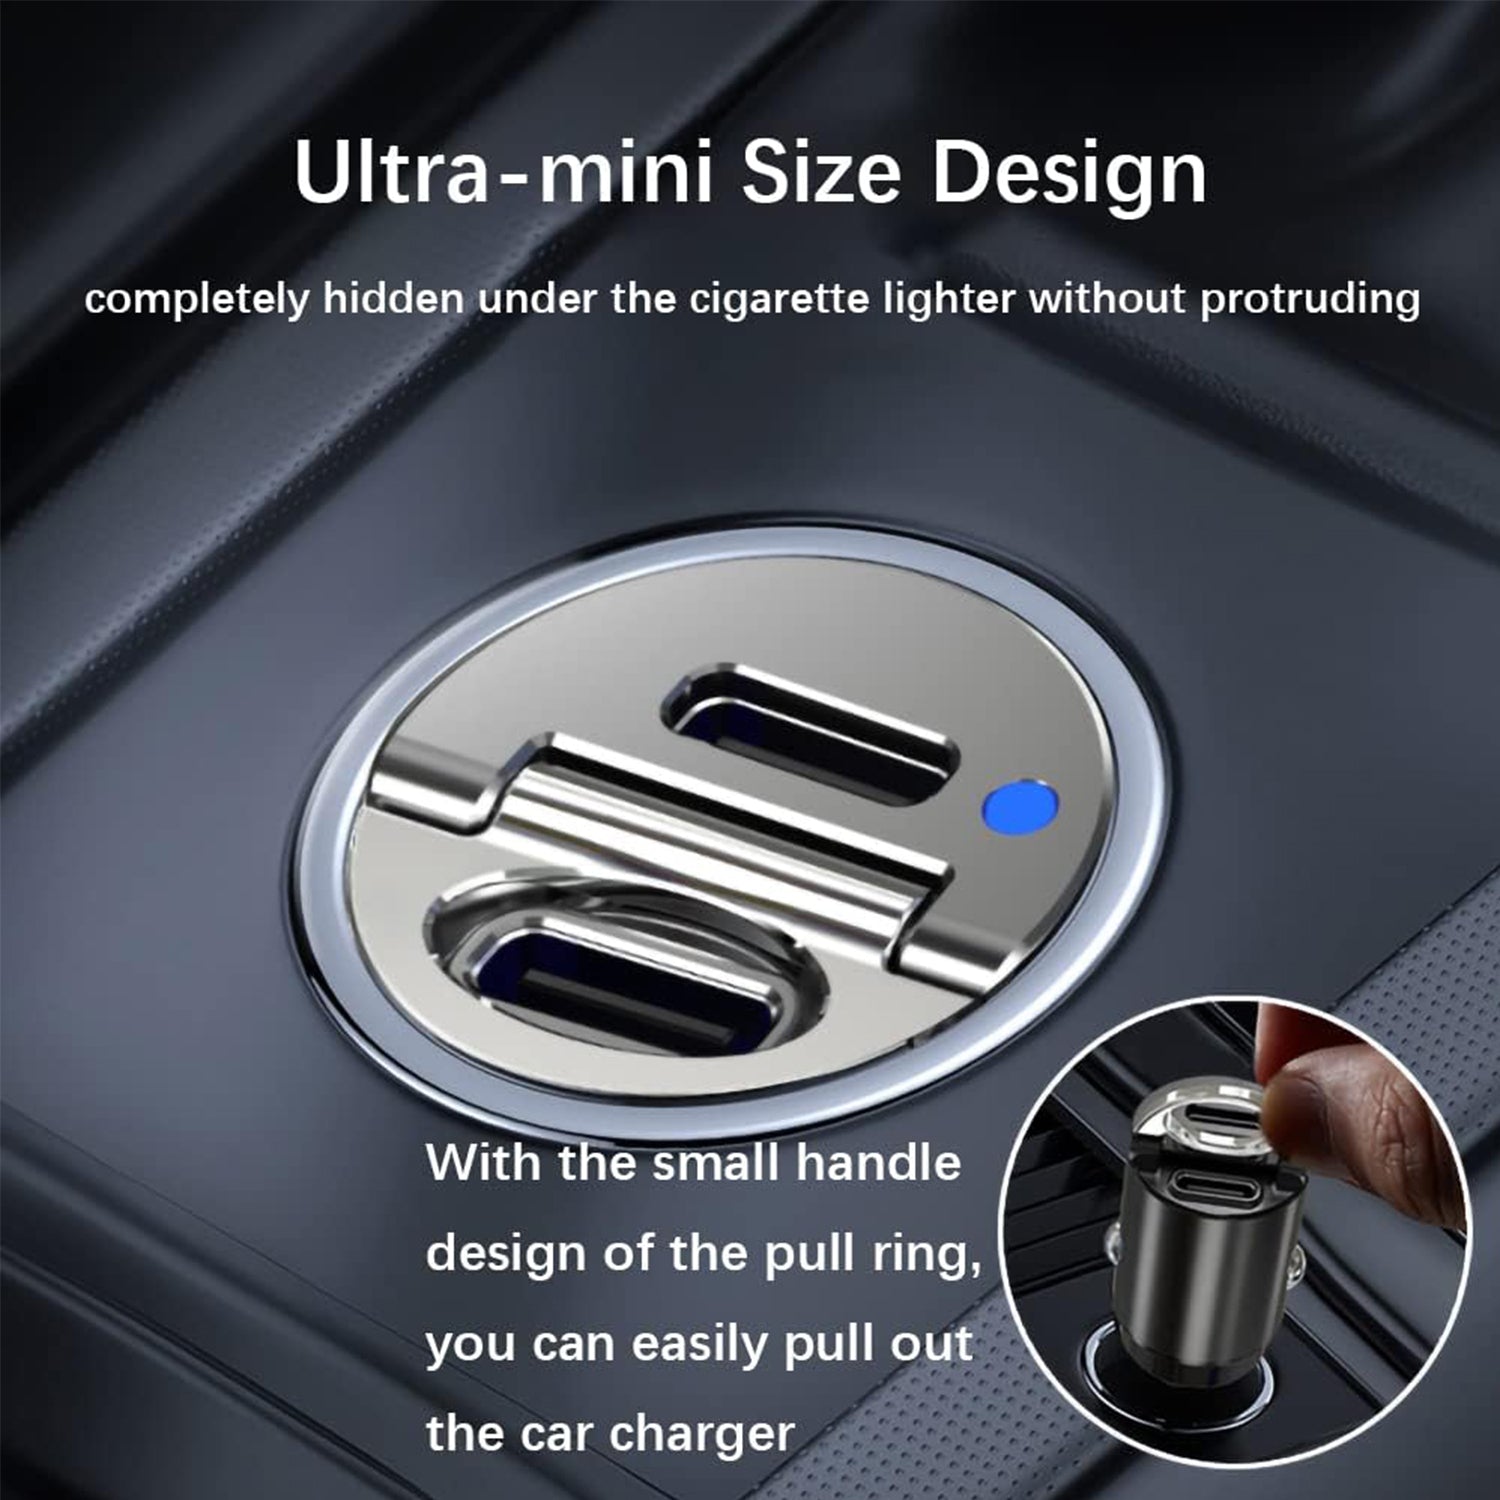 30W(2 Type-c ports) pull ring car charger